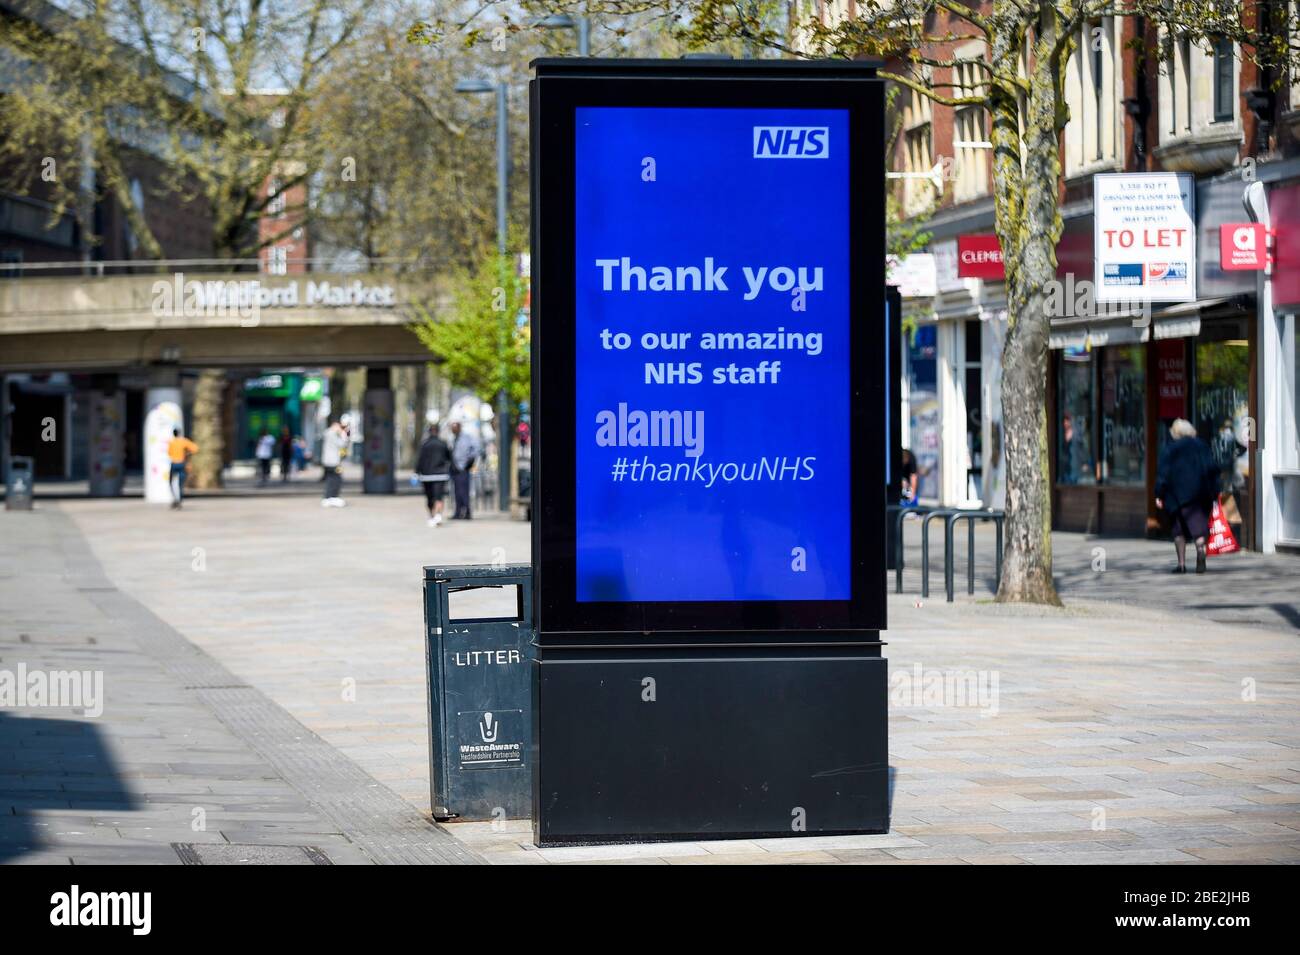 Watford, UK.  11 April 2020. A digital advertising screen in Watford shopping centre on Easter Saturday during lockdown as the coronavirus (COVID19) pandemic continues.  The screen shows a message thanking the NHS.  Credit: Stephen Chung / Alamy Live News Stock Photo